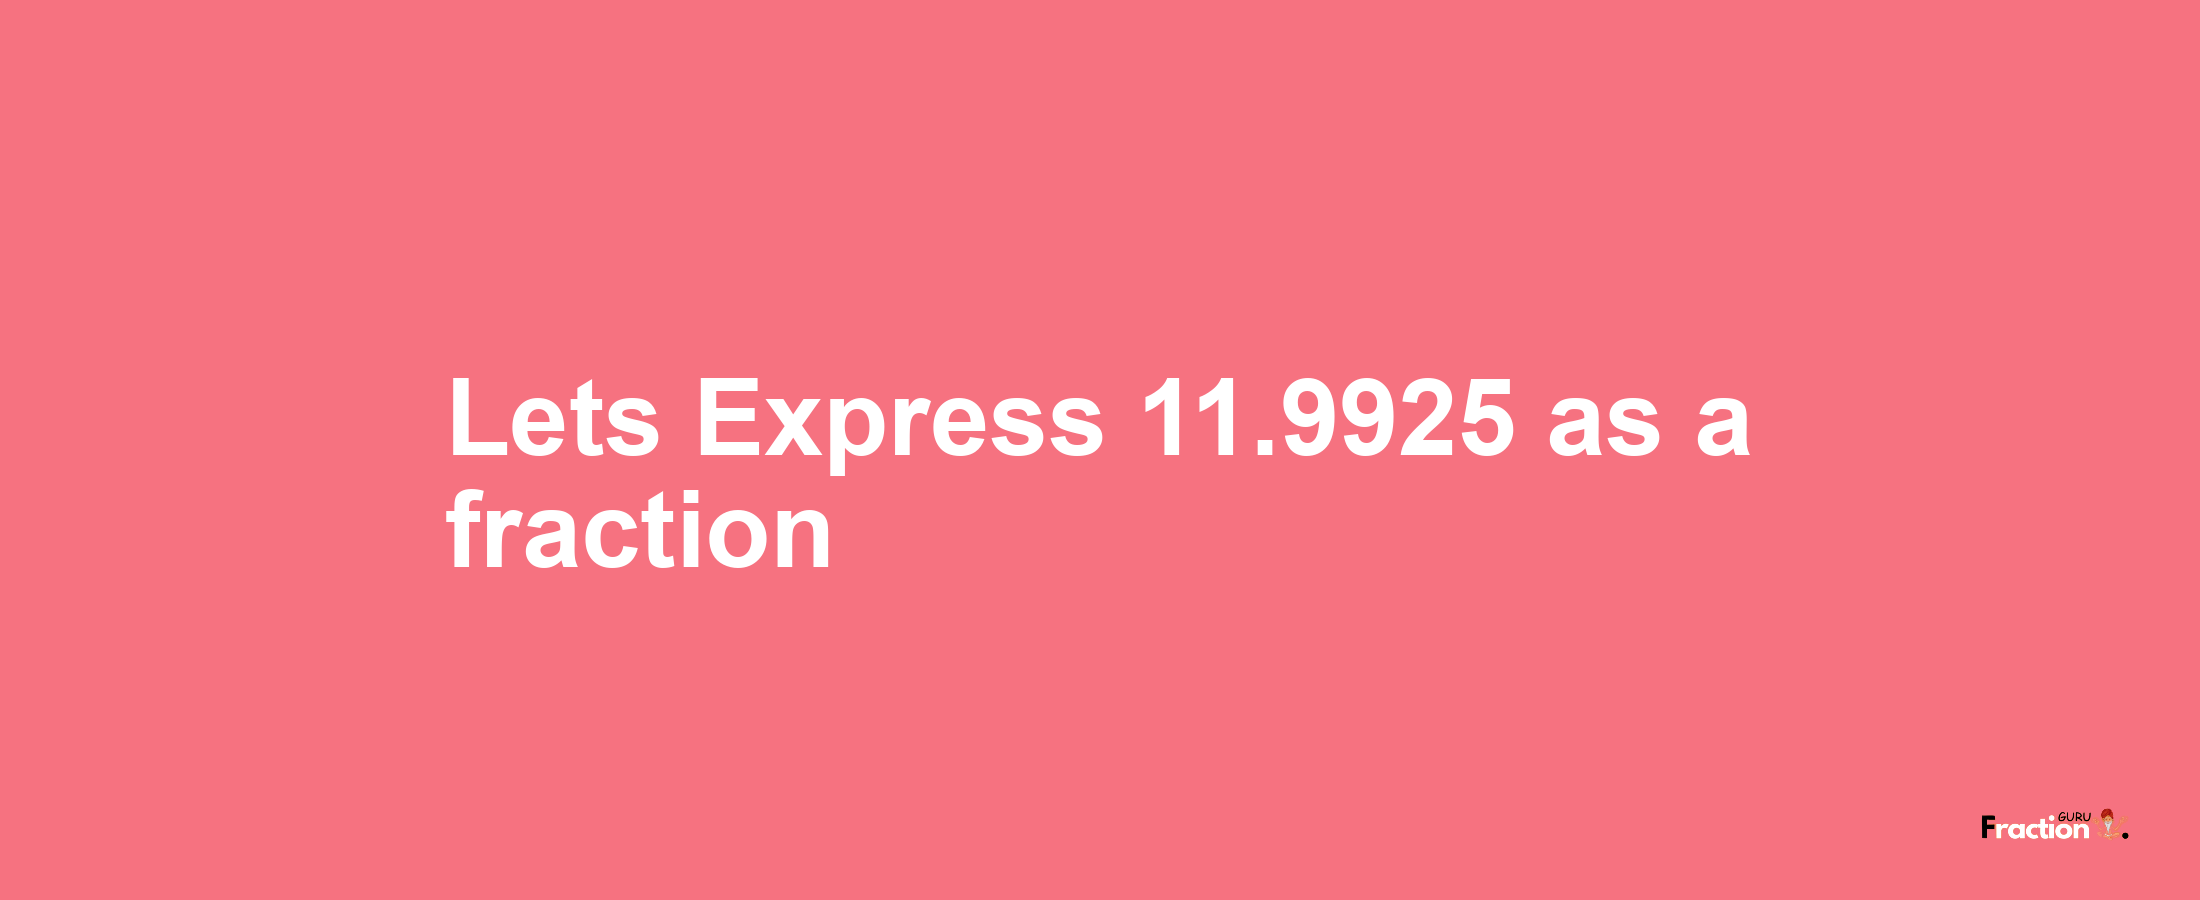 Lets Express 11.9925 as afraction